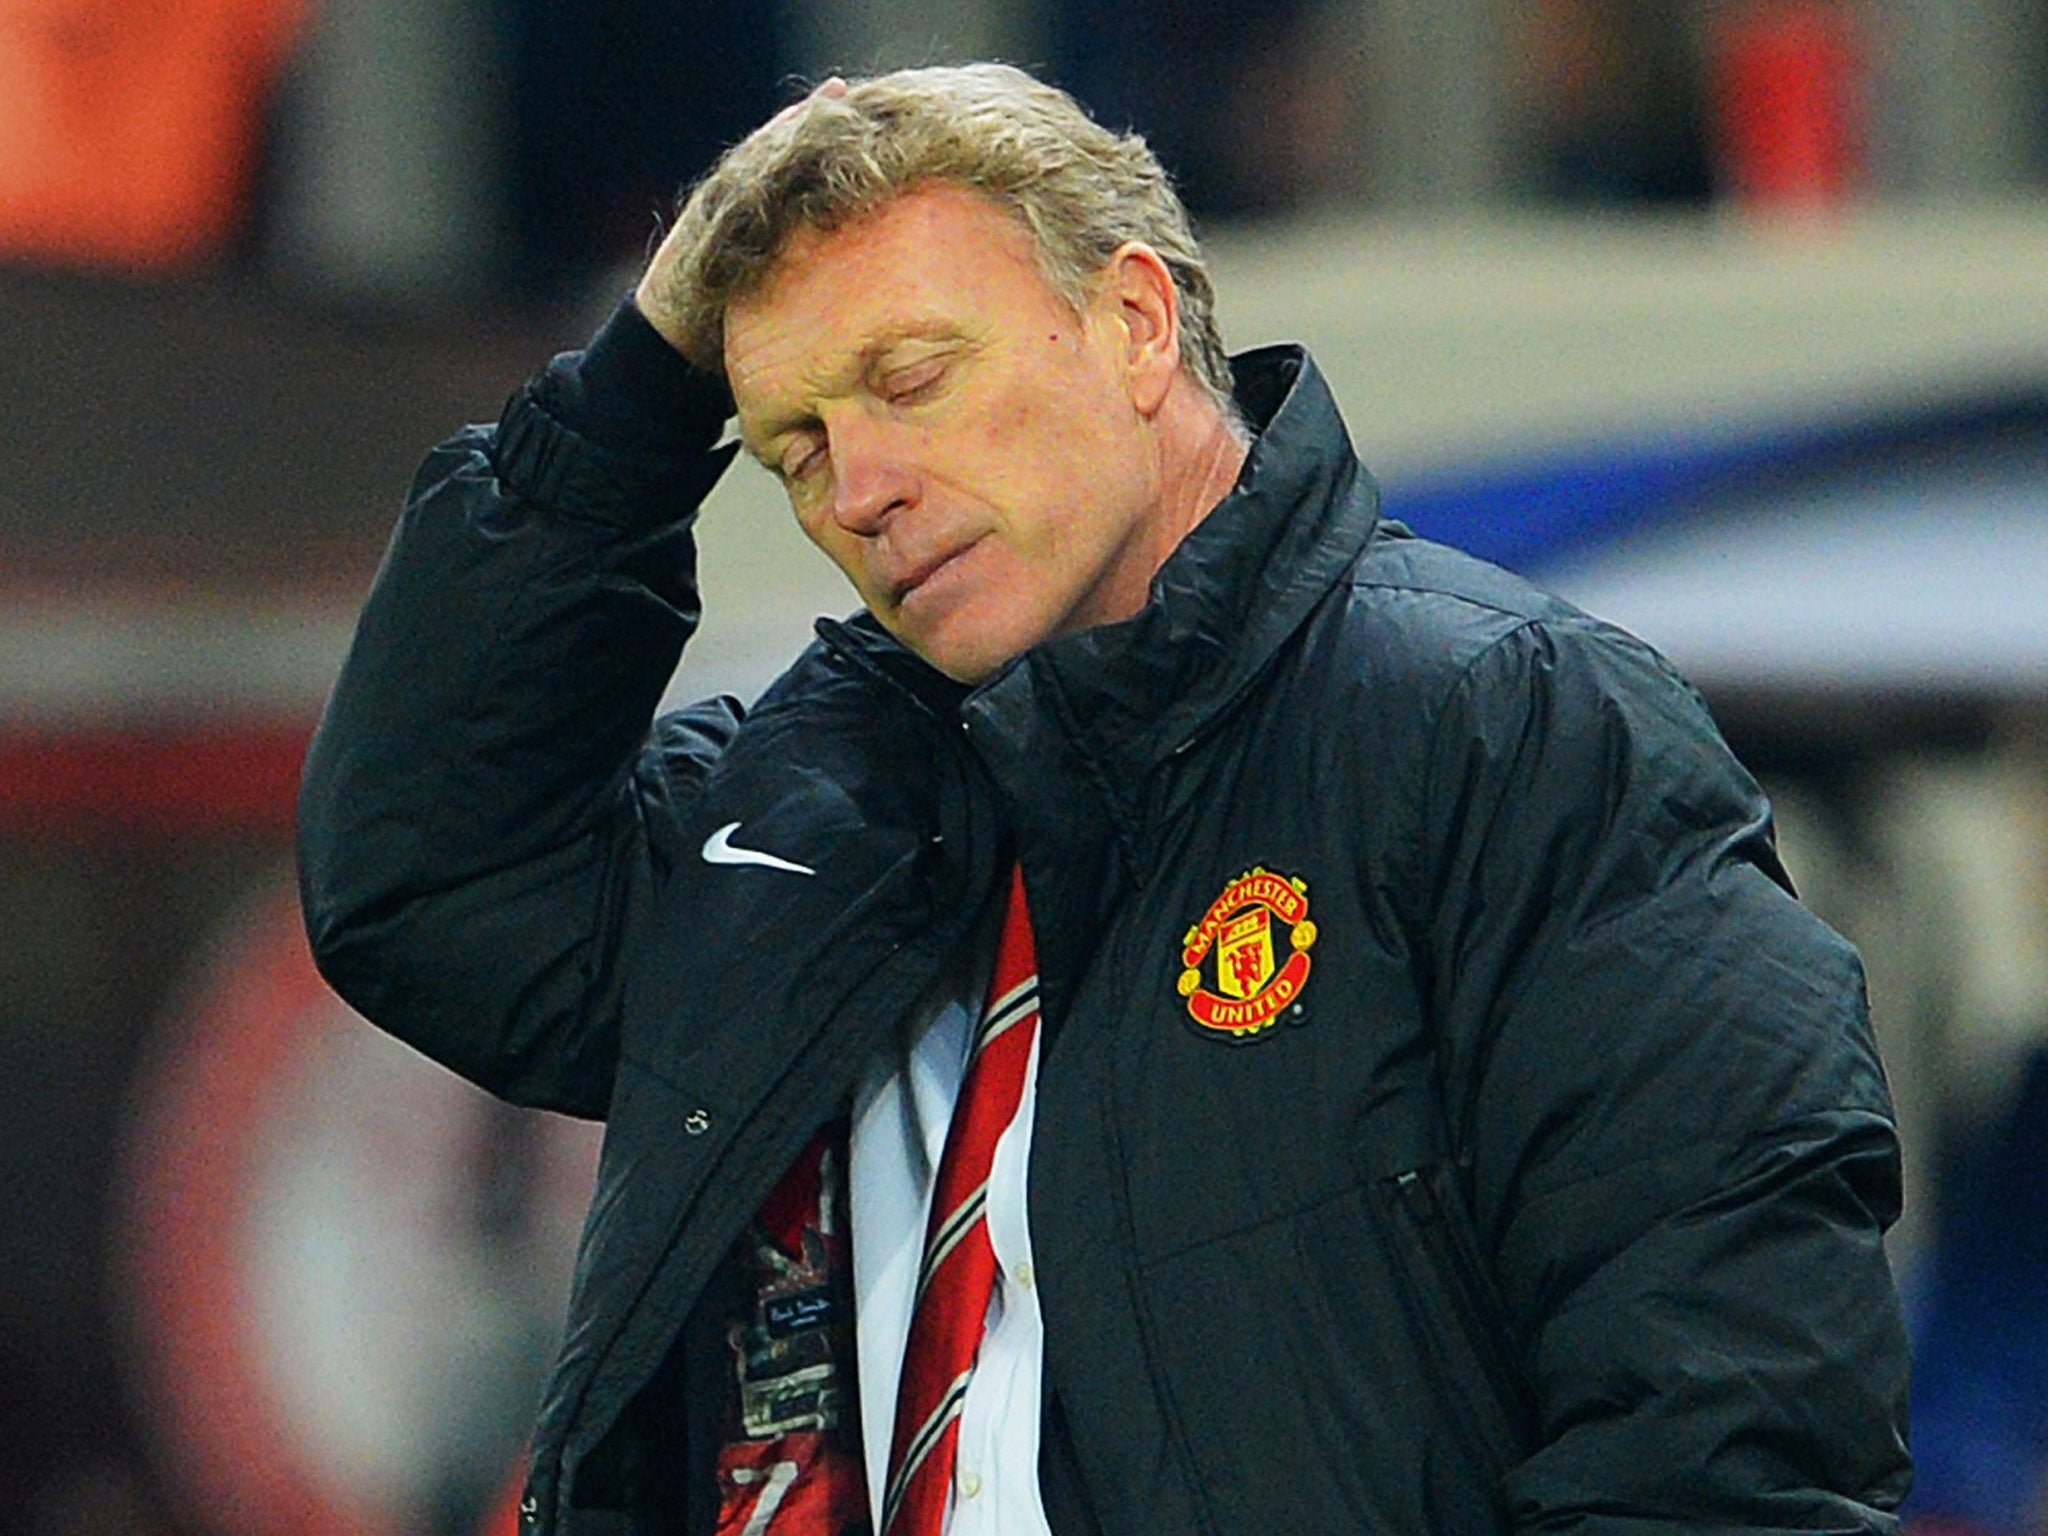 A downbeat David Moyes looks on from the touchline